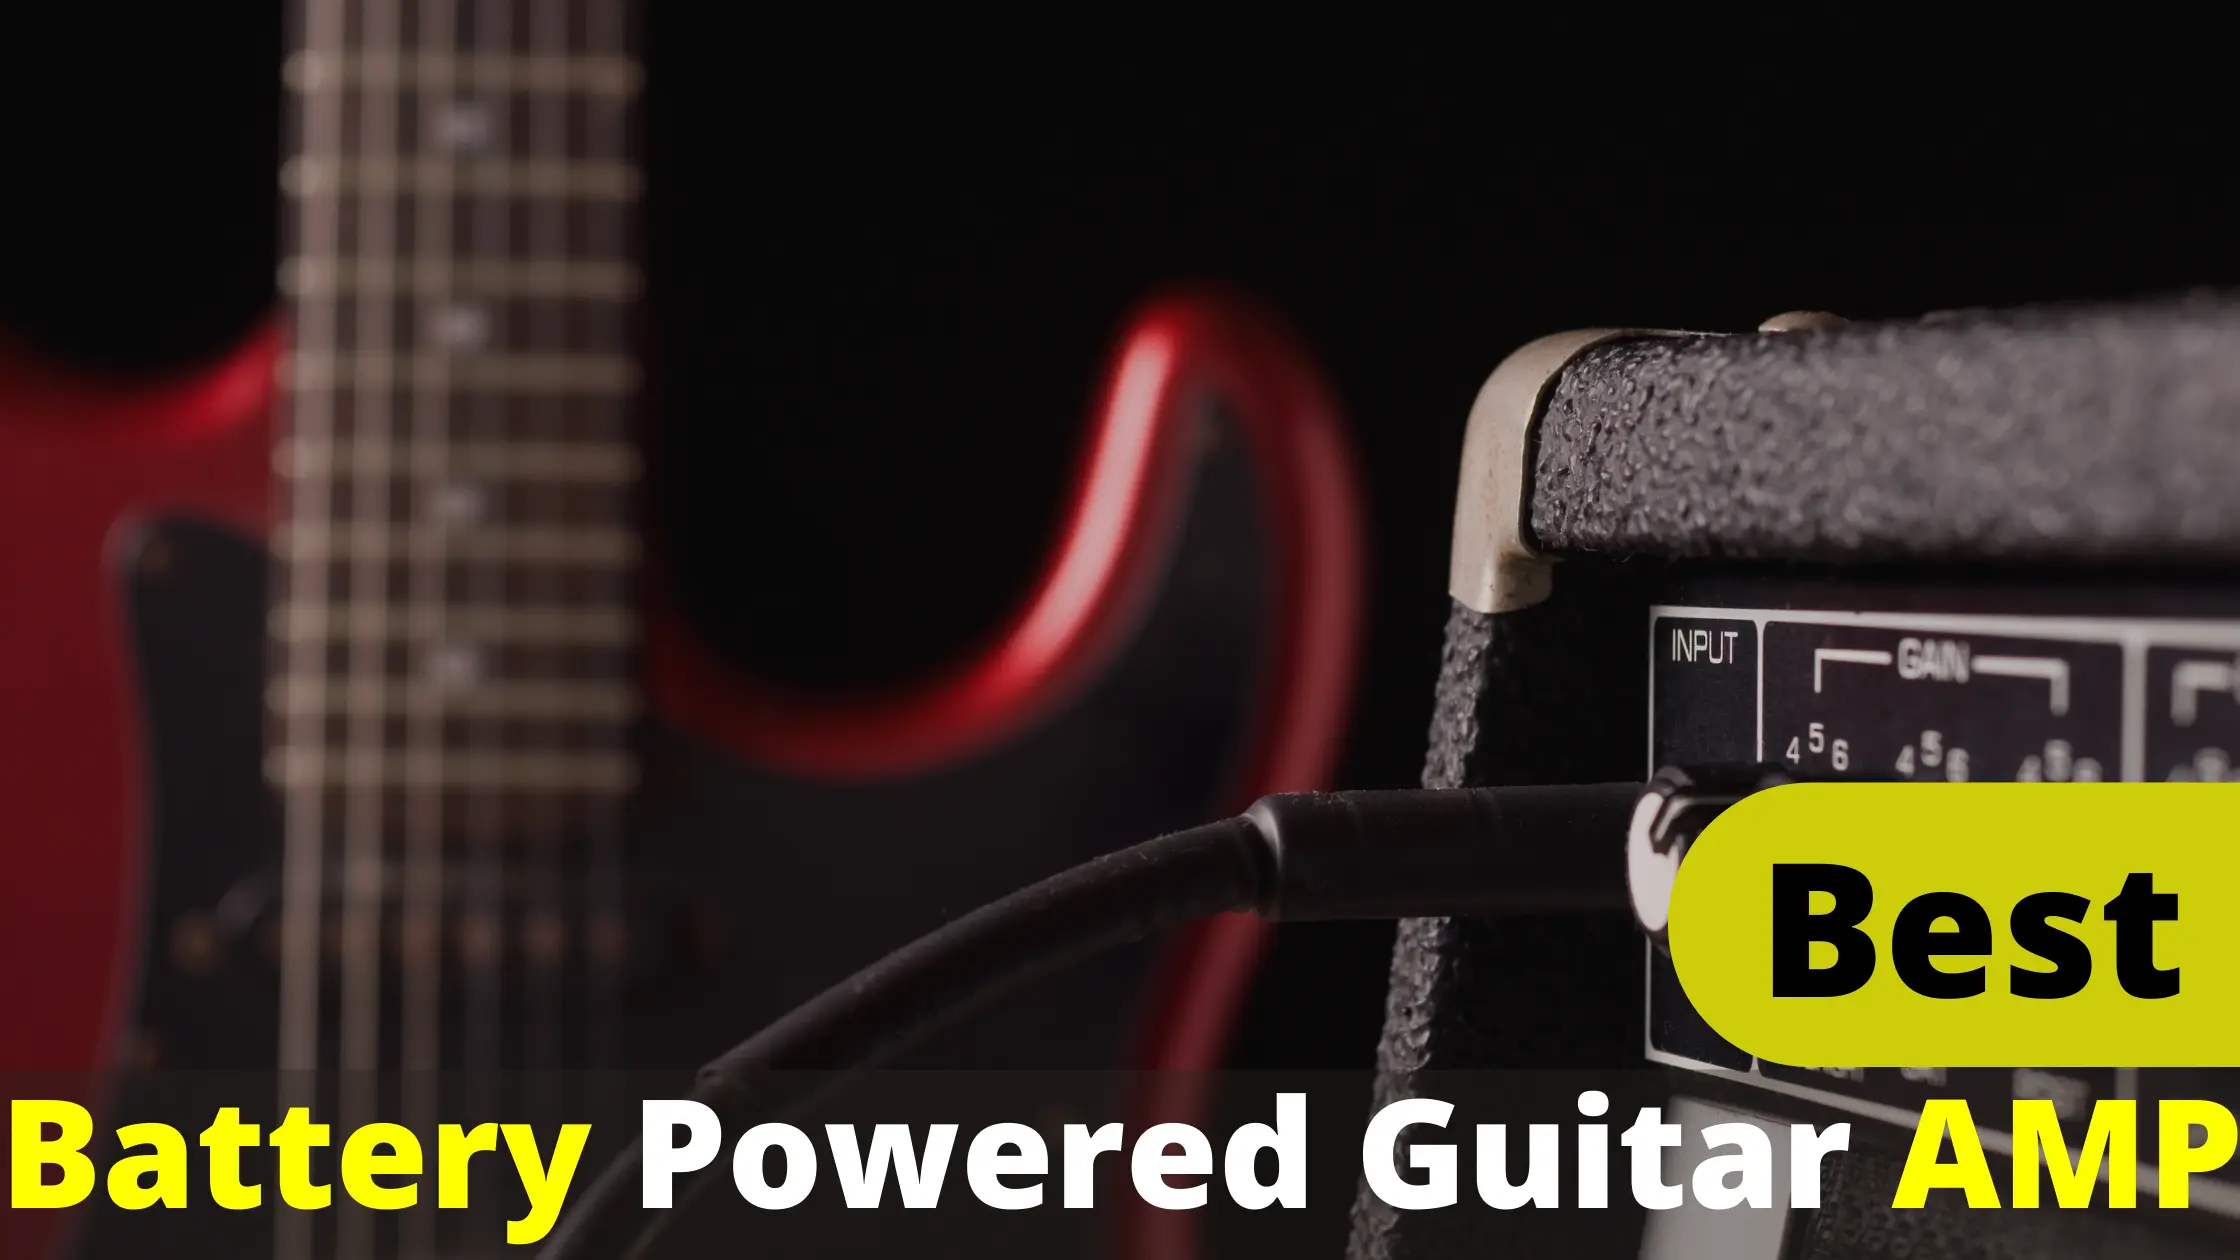 Top 10 Best Battery Powered Guitar Amp Reviews and Buying Guide 2022